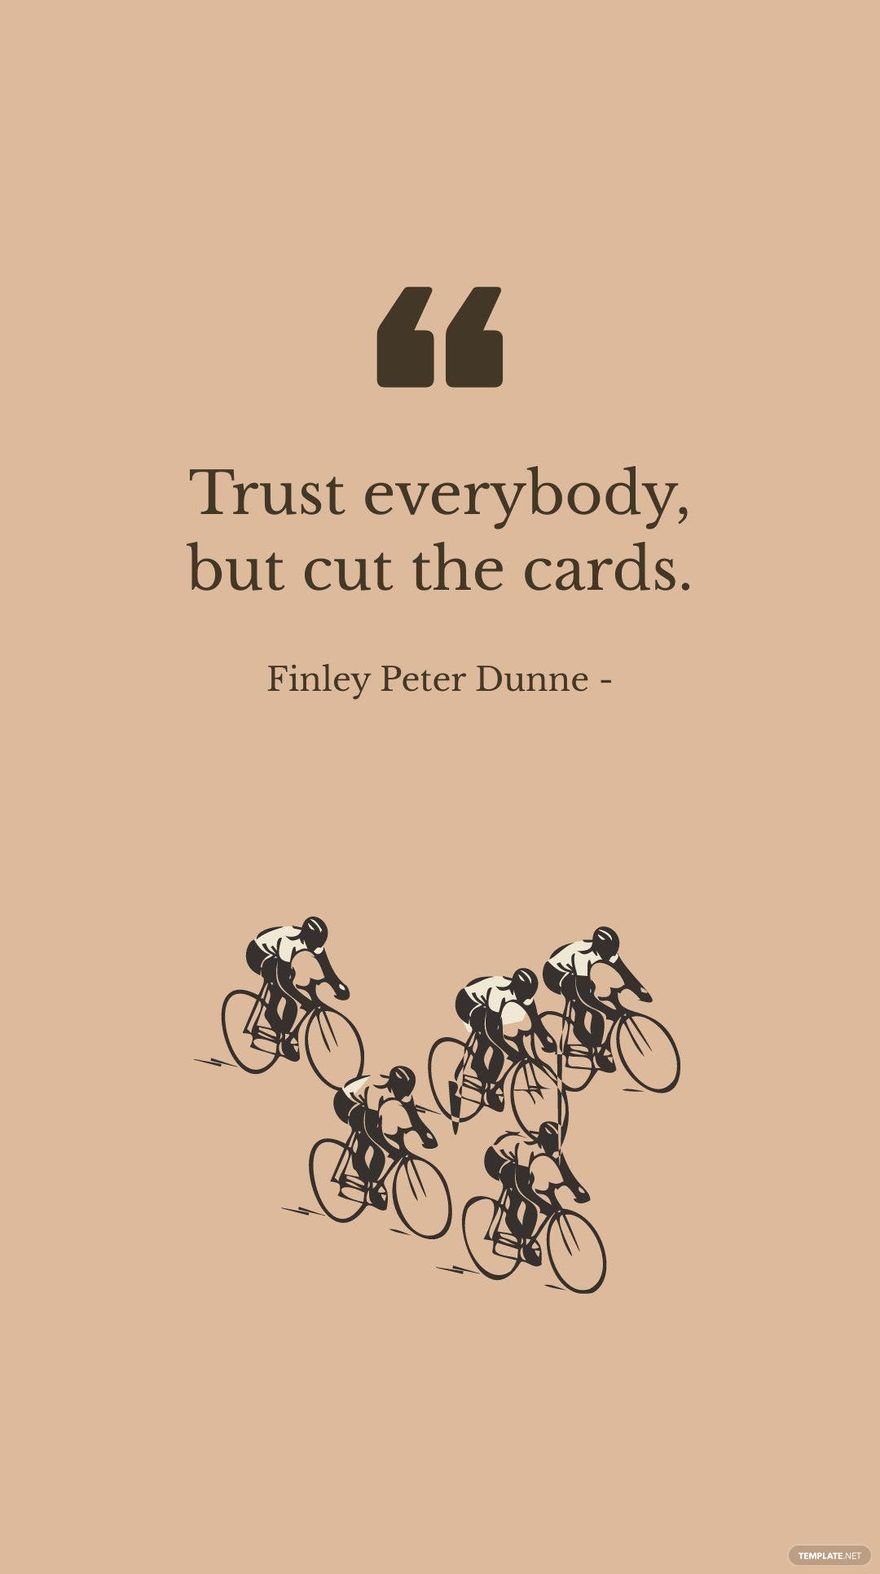 Free Finley Peter Dunne - Trust everybody, but cut the cards. in JPG